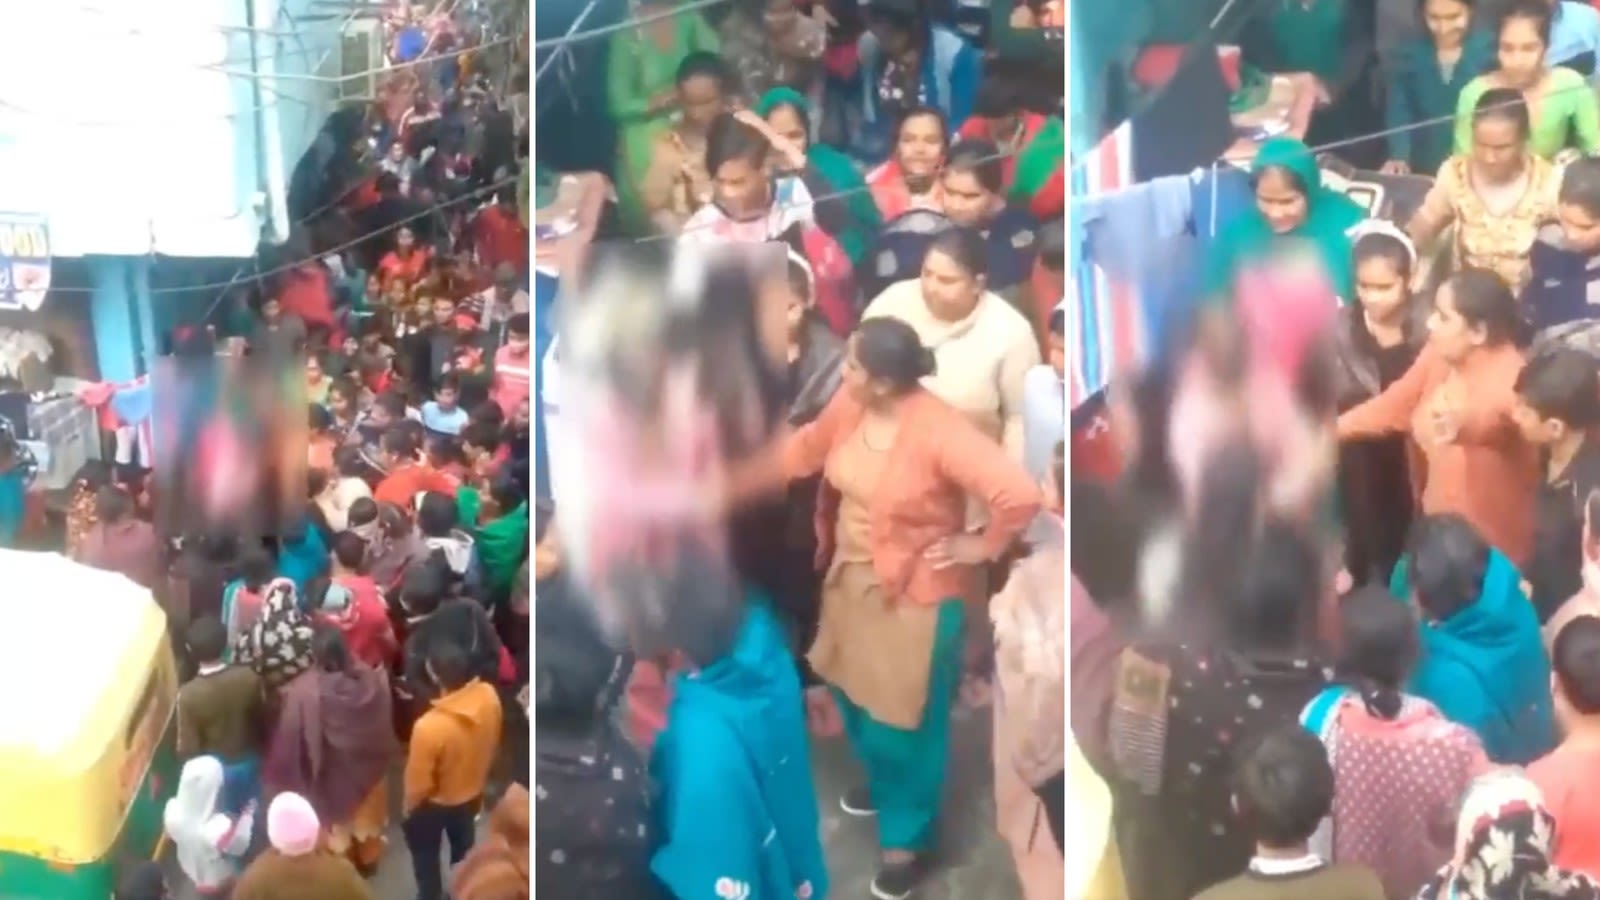 Indian Drunk Rape Porn - Some people in a cheering crowd called for her to be raped. Many were women  | CNN